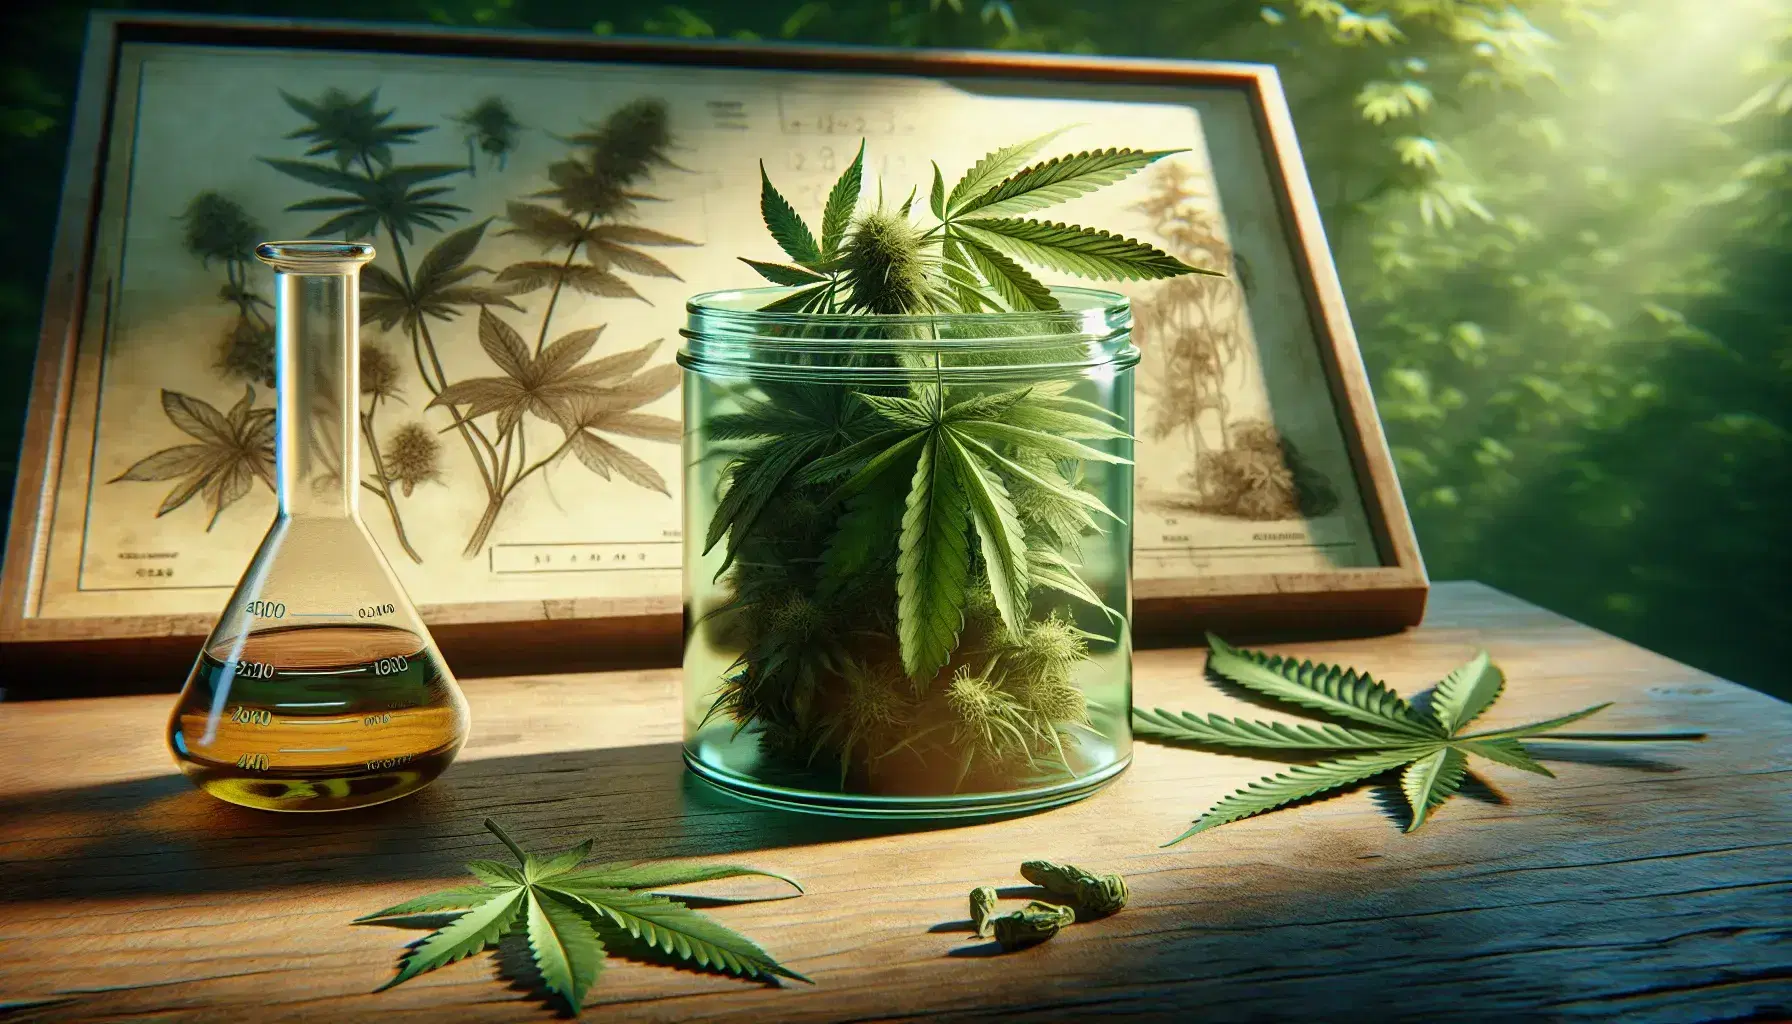 Glass jar with dried cannabis leaves on wooden surface next to beaker with amber liquid, background with botanical illustrations.